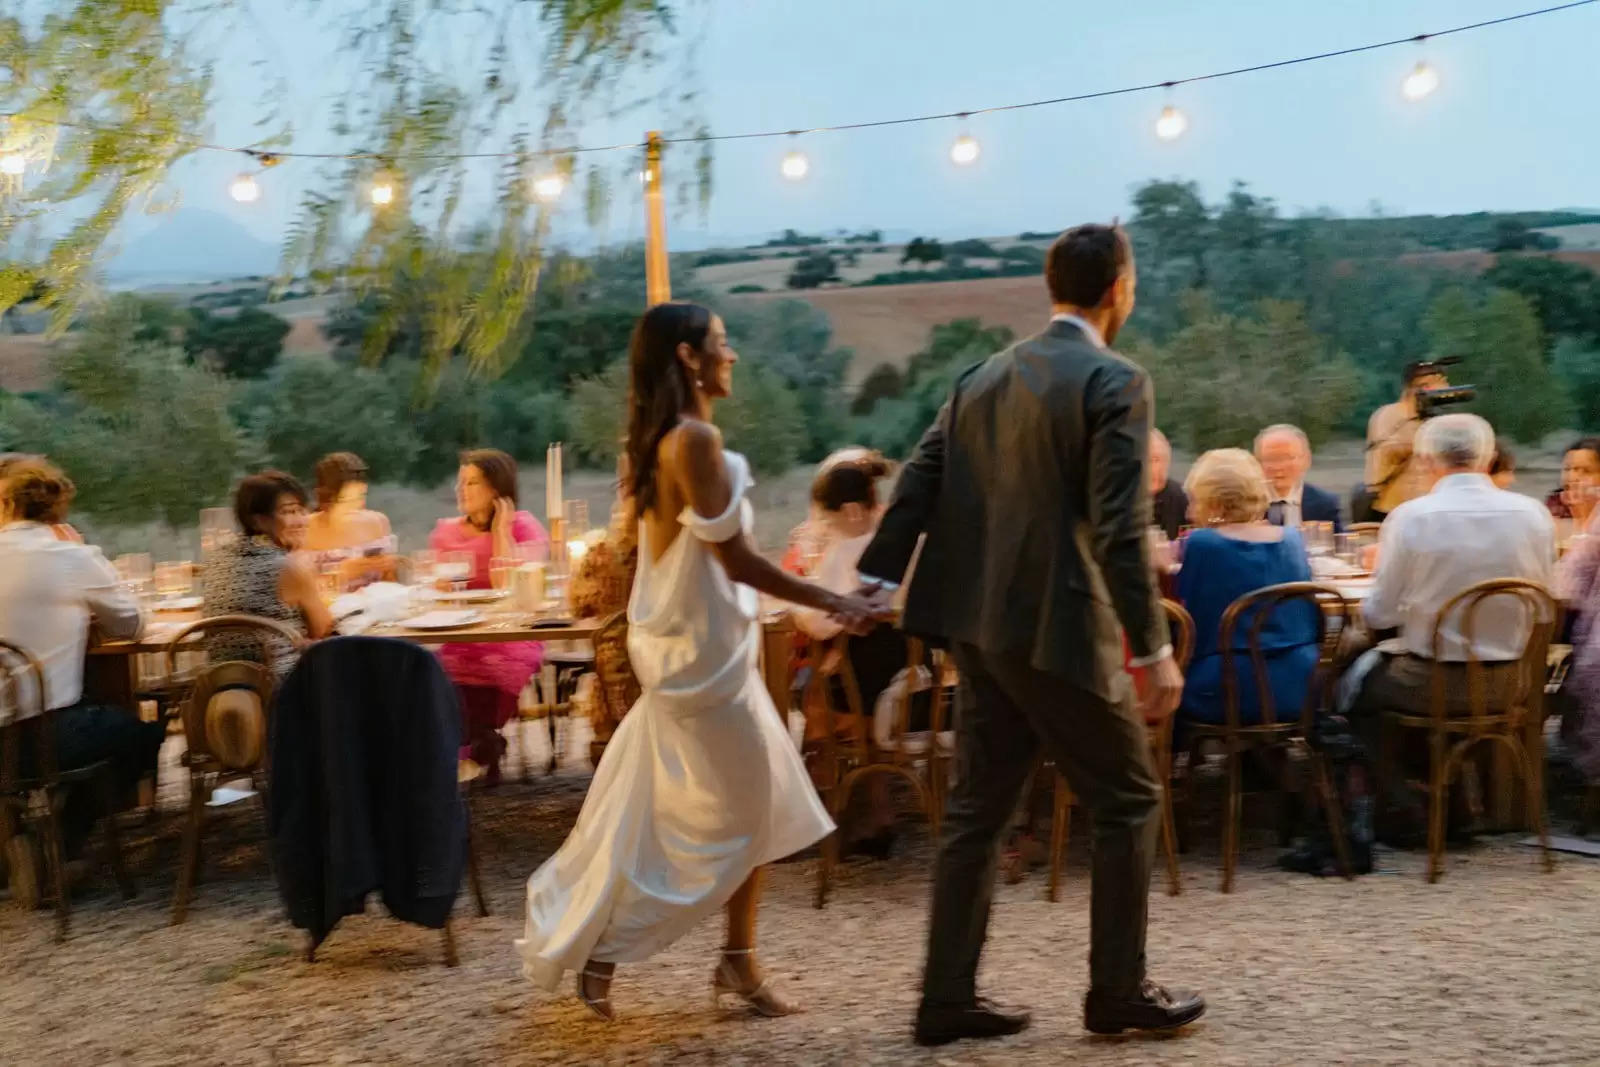 Laid-back Luxurious | A Spanish Hacienda Marriage ceremony | Distinctive Vacation spot Weddings Europe | Open the Door Occasions